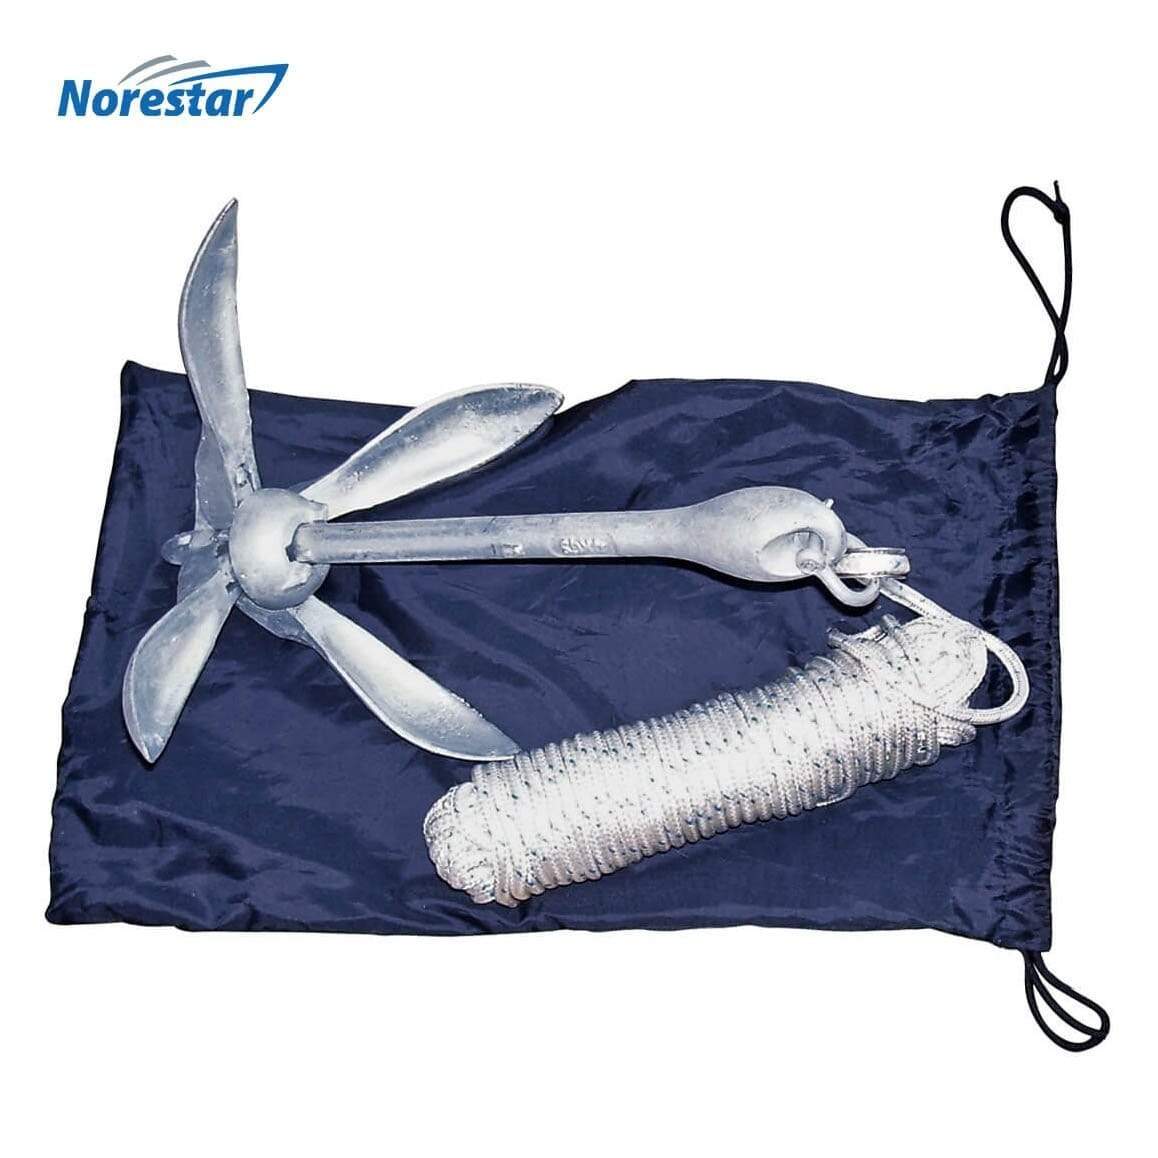 Folding Grapnel Boat Anchor System with Anchor Rope for Small